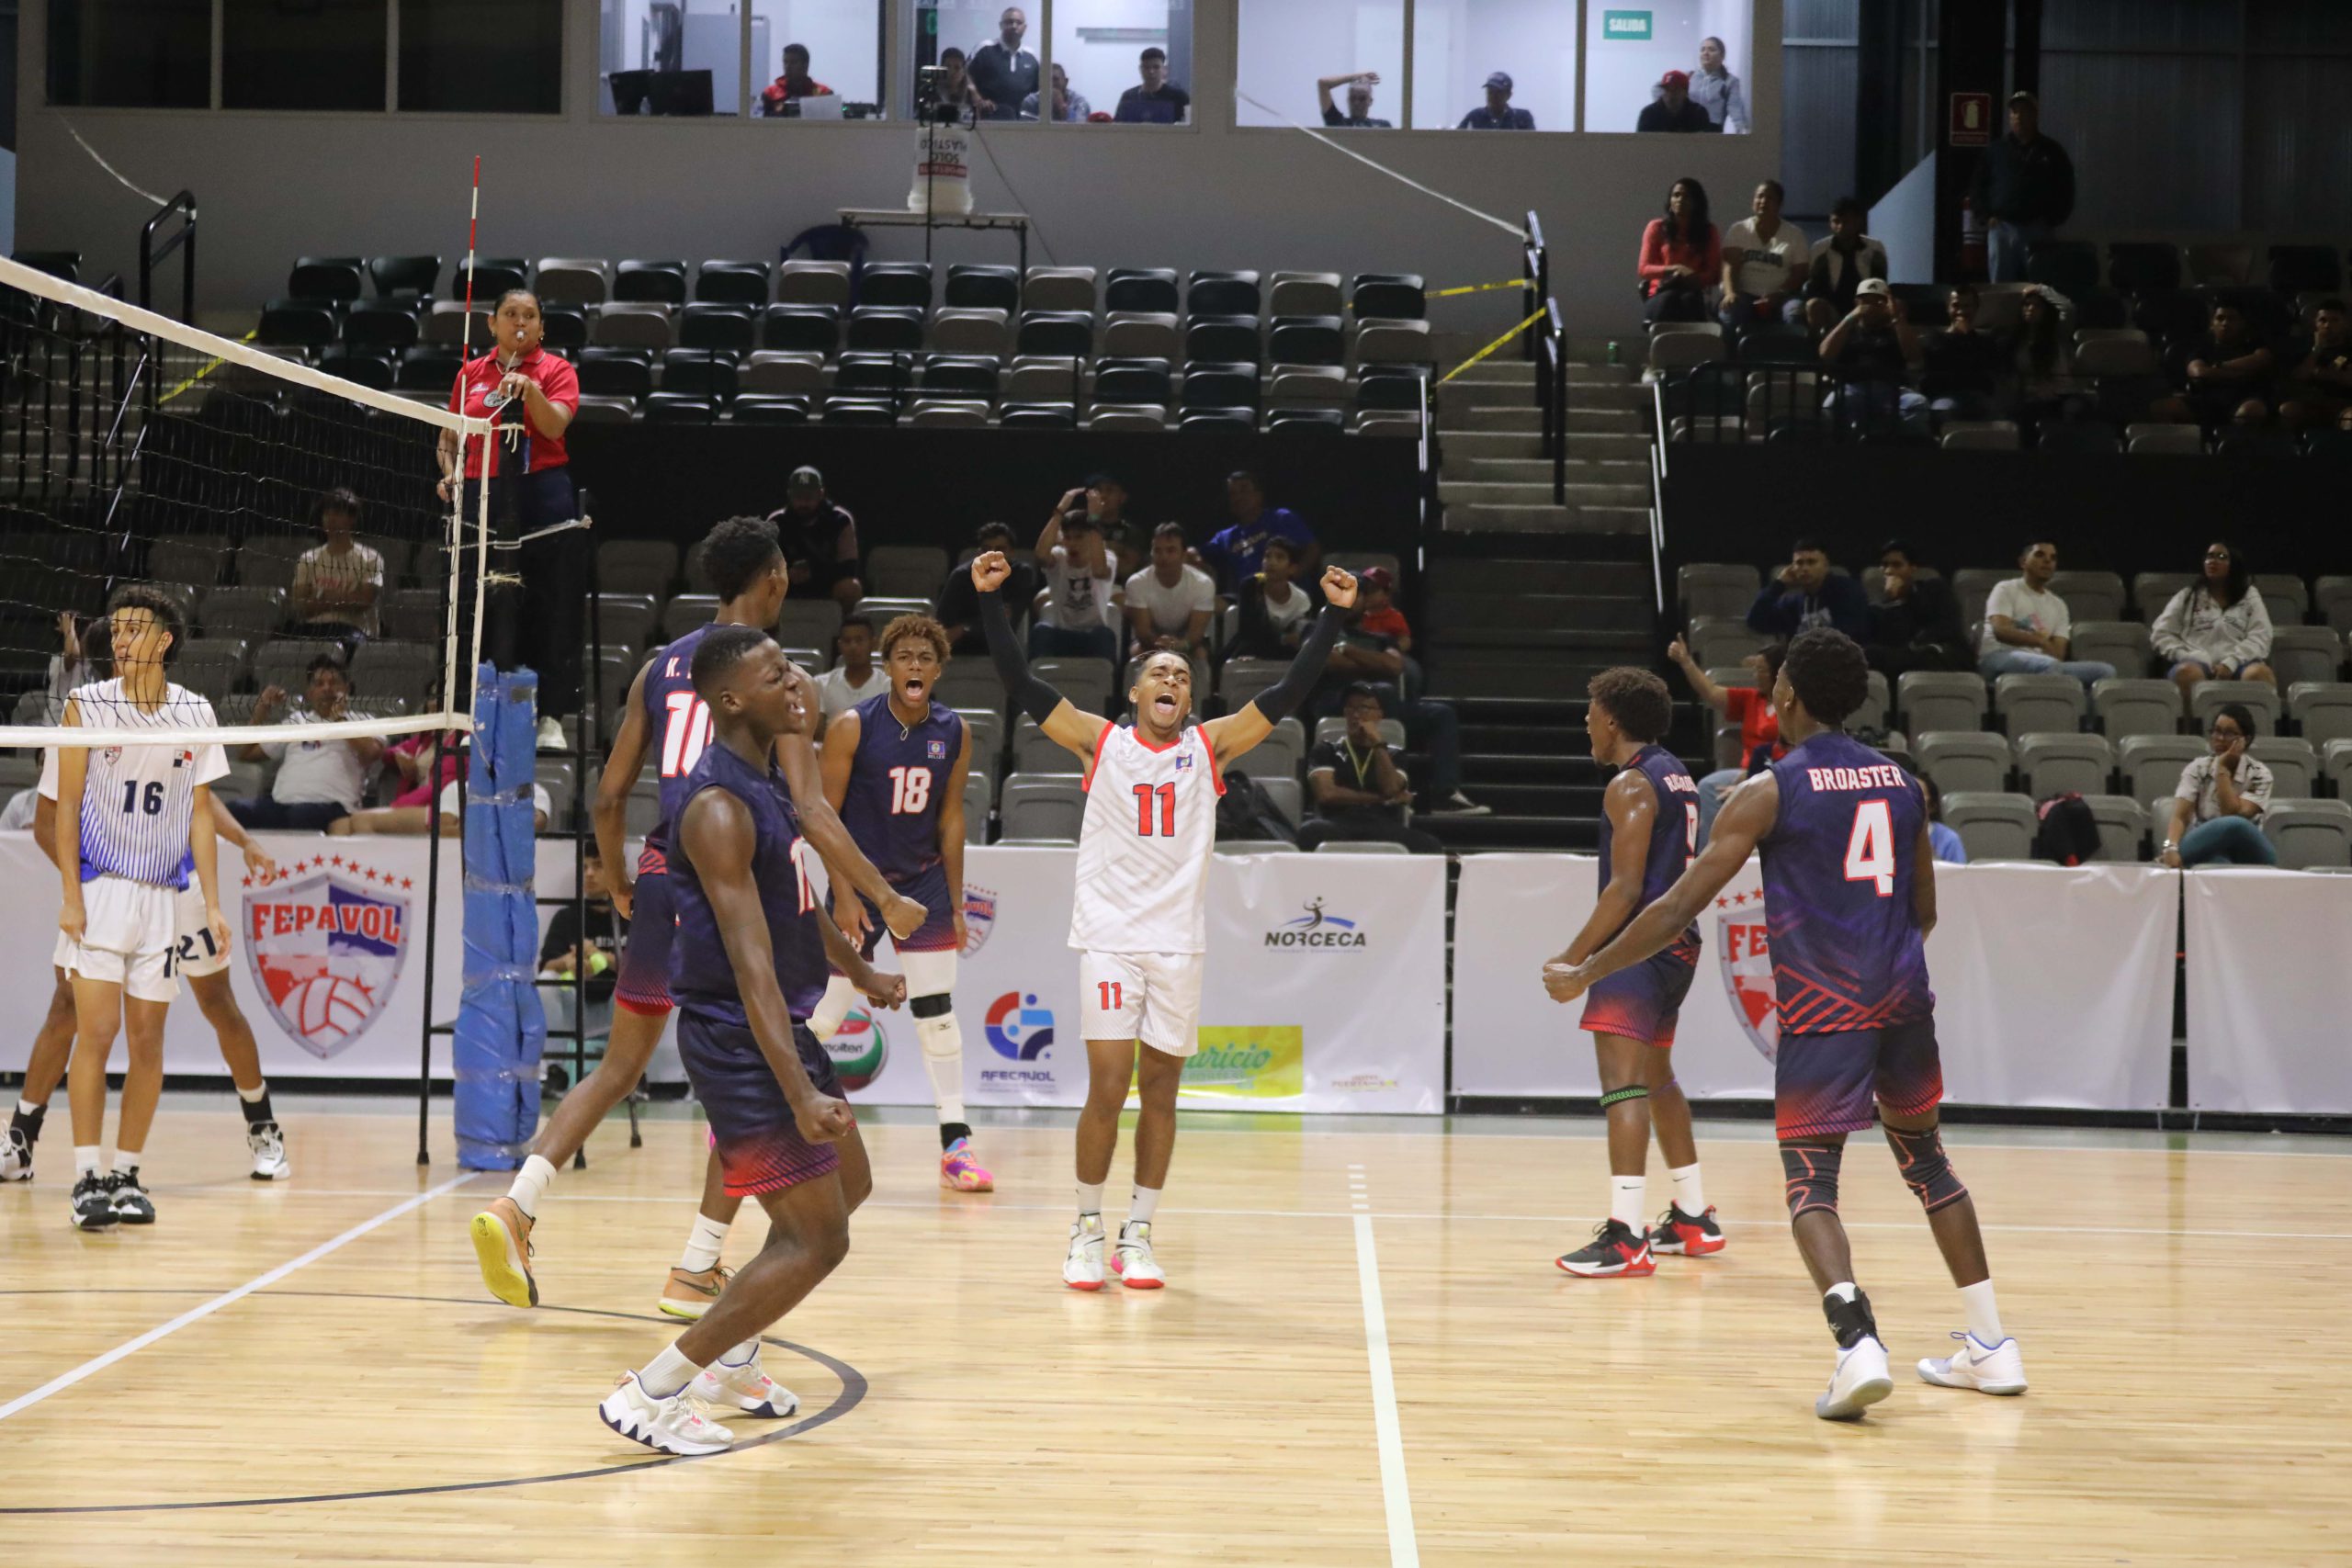 Belize earns second victory defeating Panama